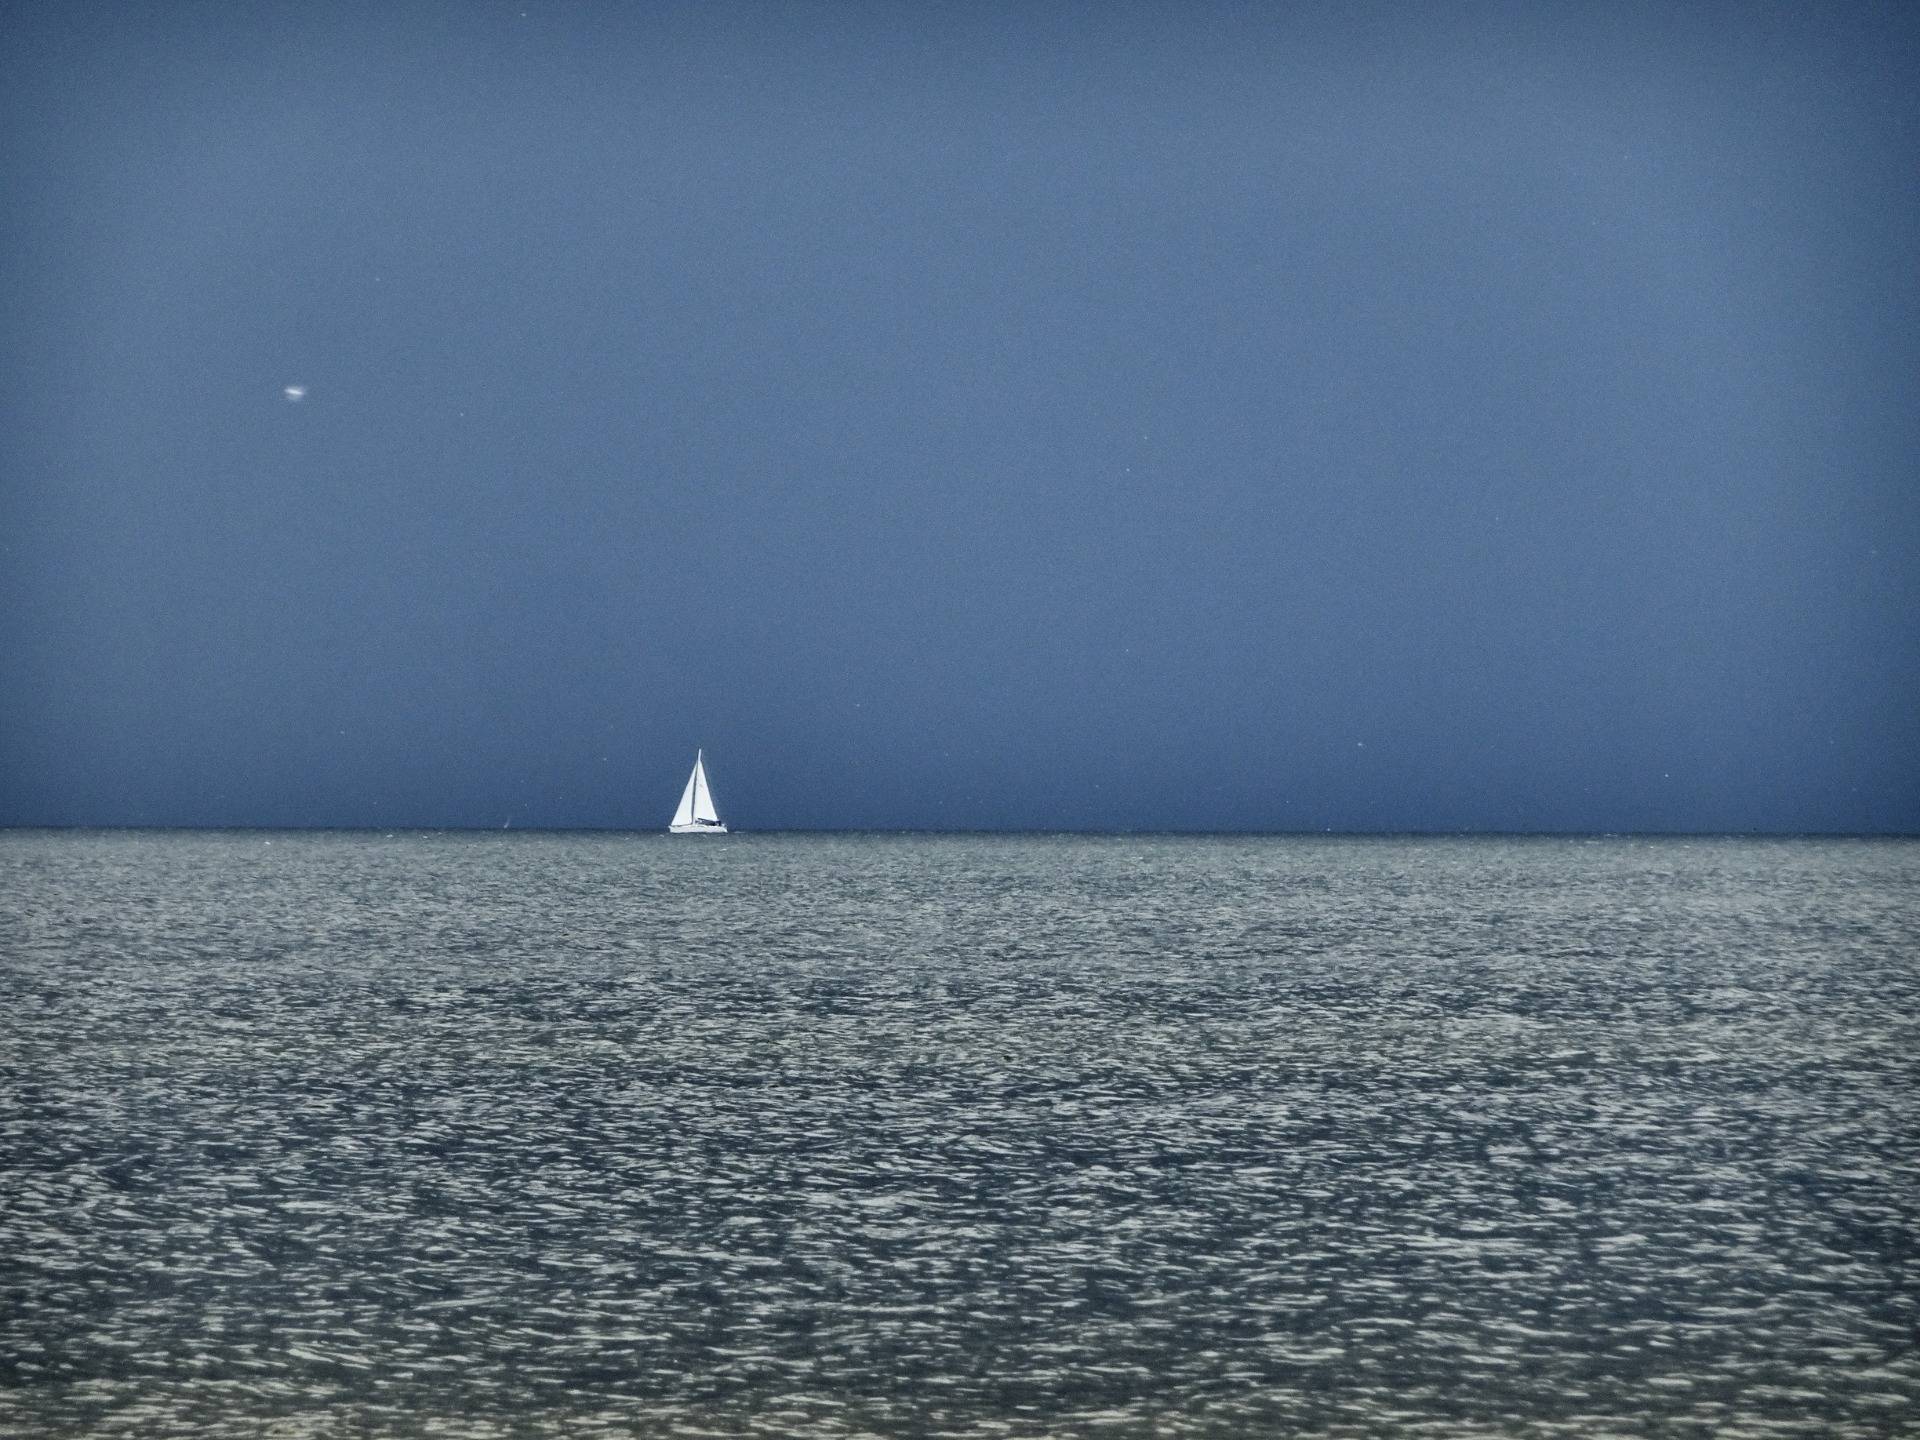 A lonely sail flashes like the russian author Valentin Katajew has written